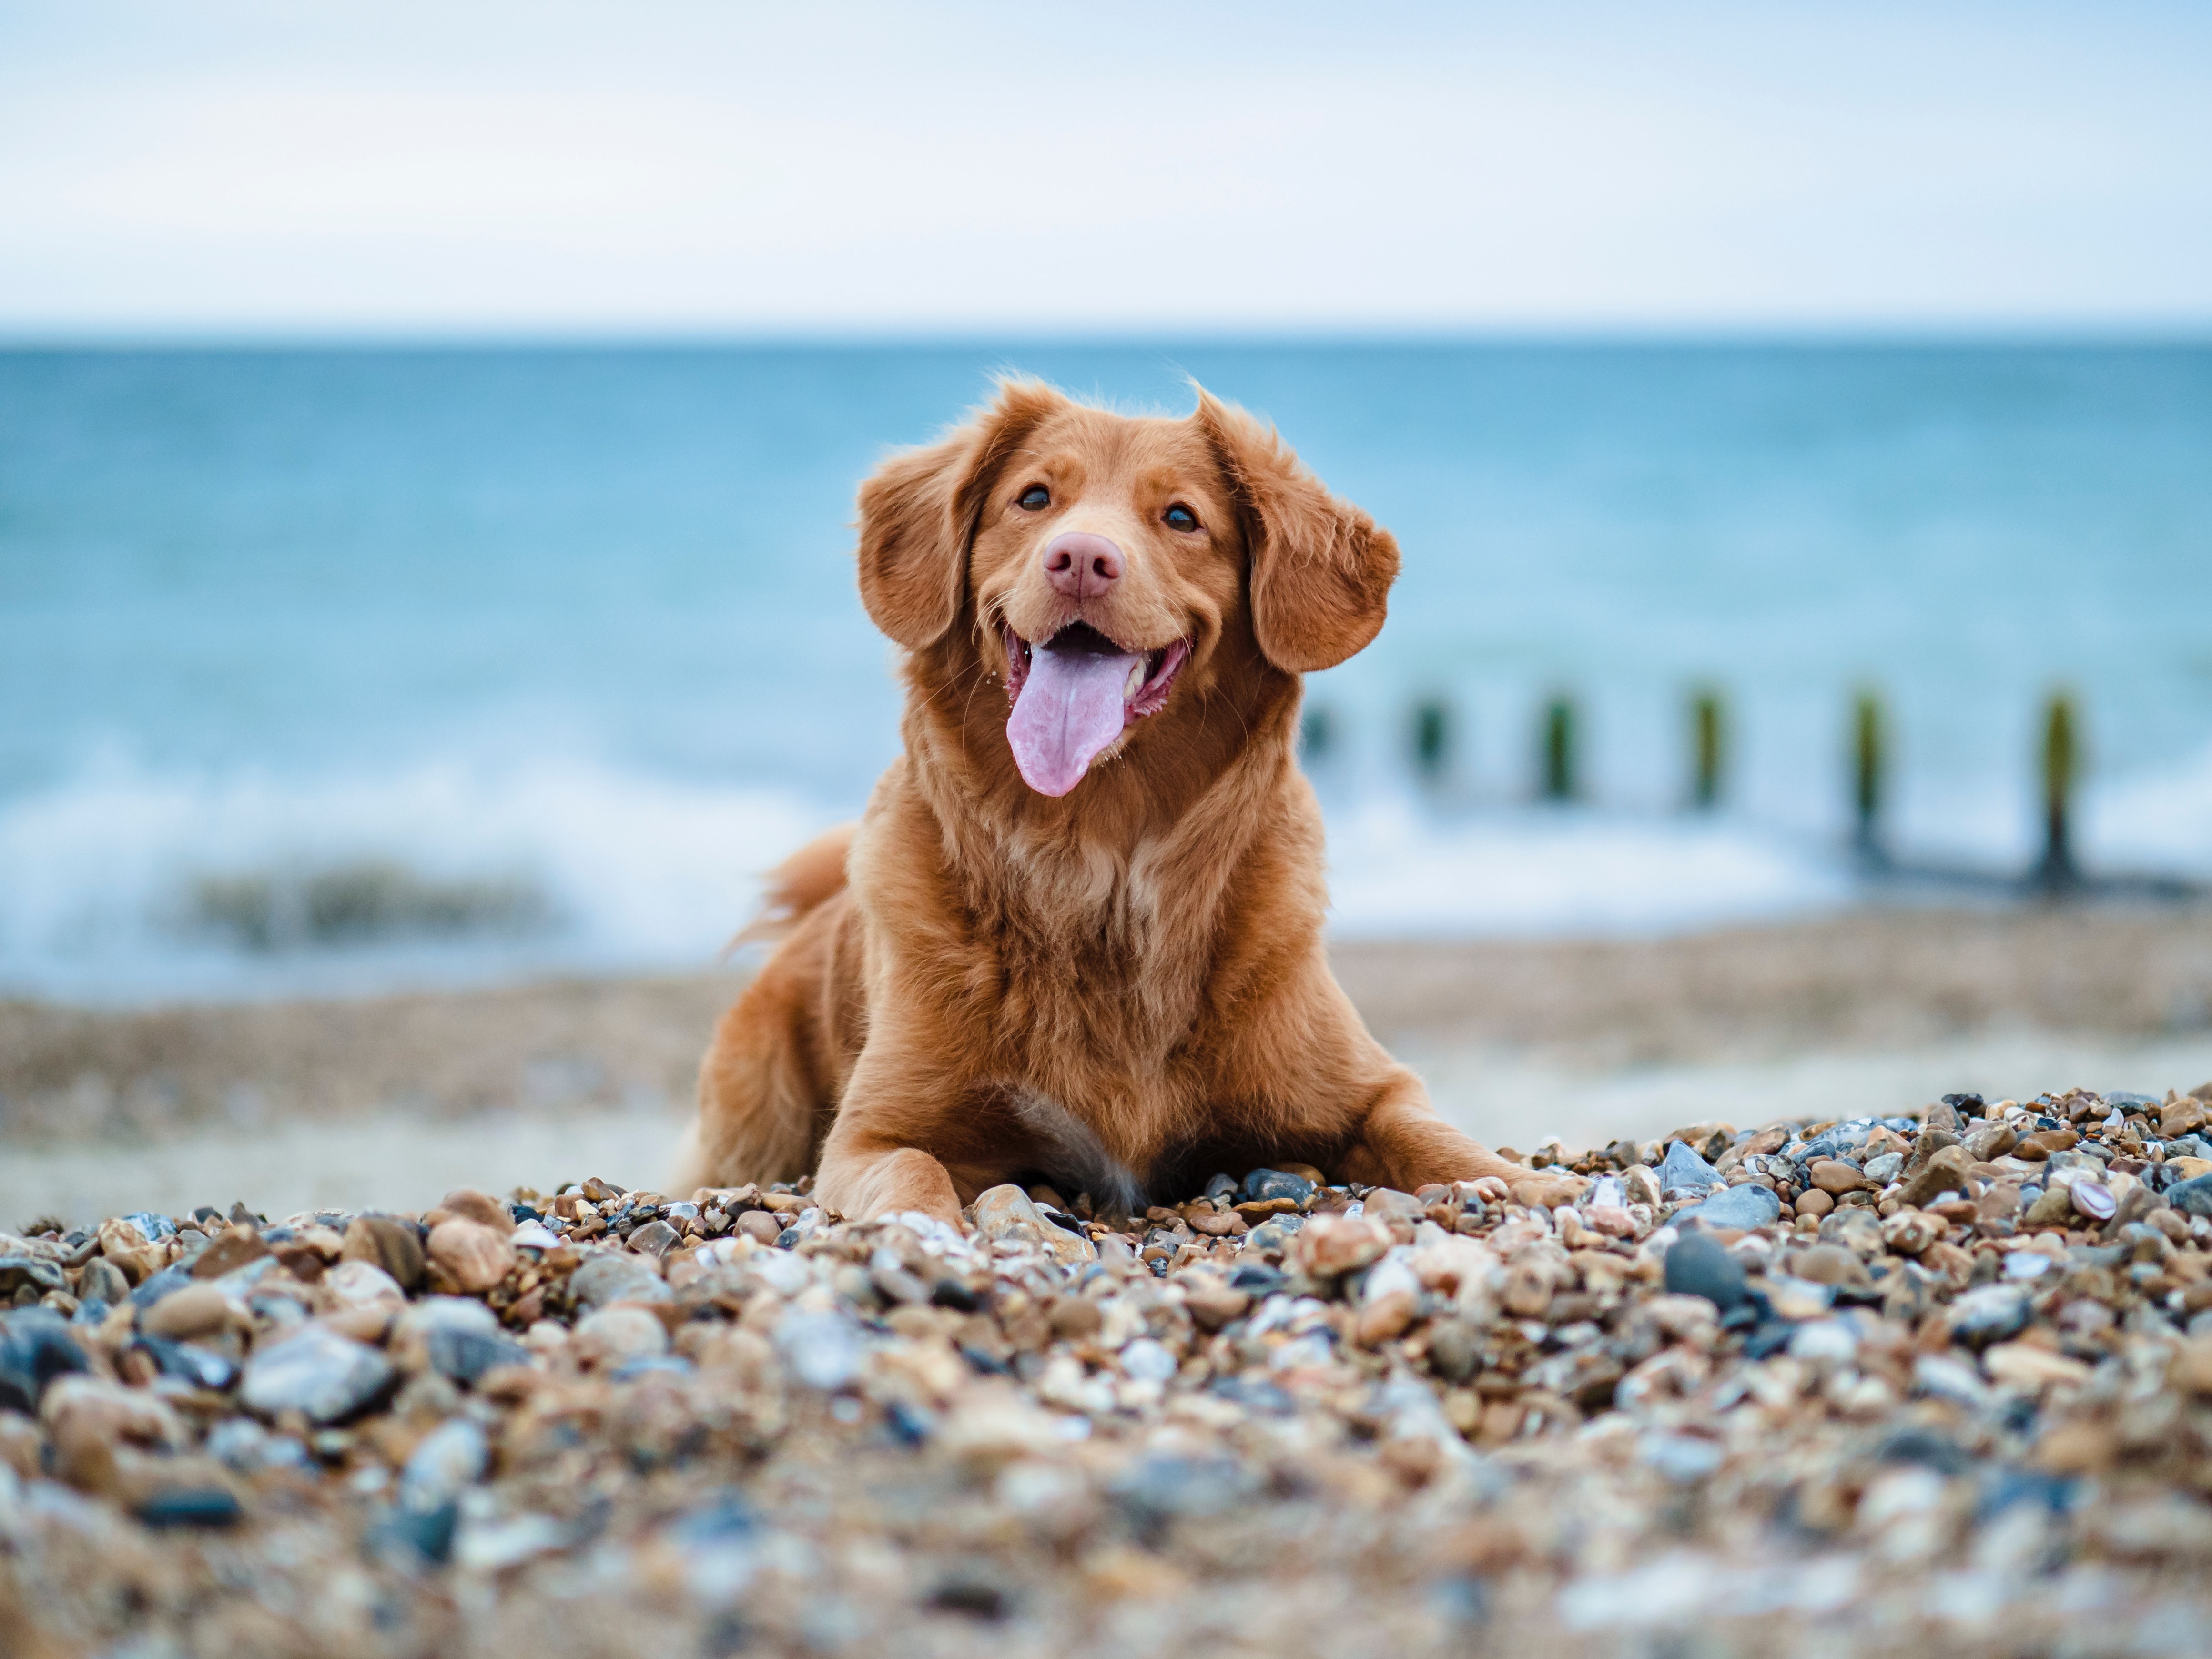 Cool Backgrounds dog, retriever, tongue stuck out, protruding tongue Pebble